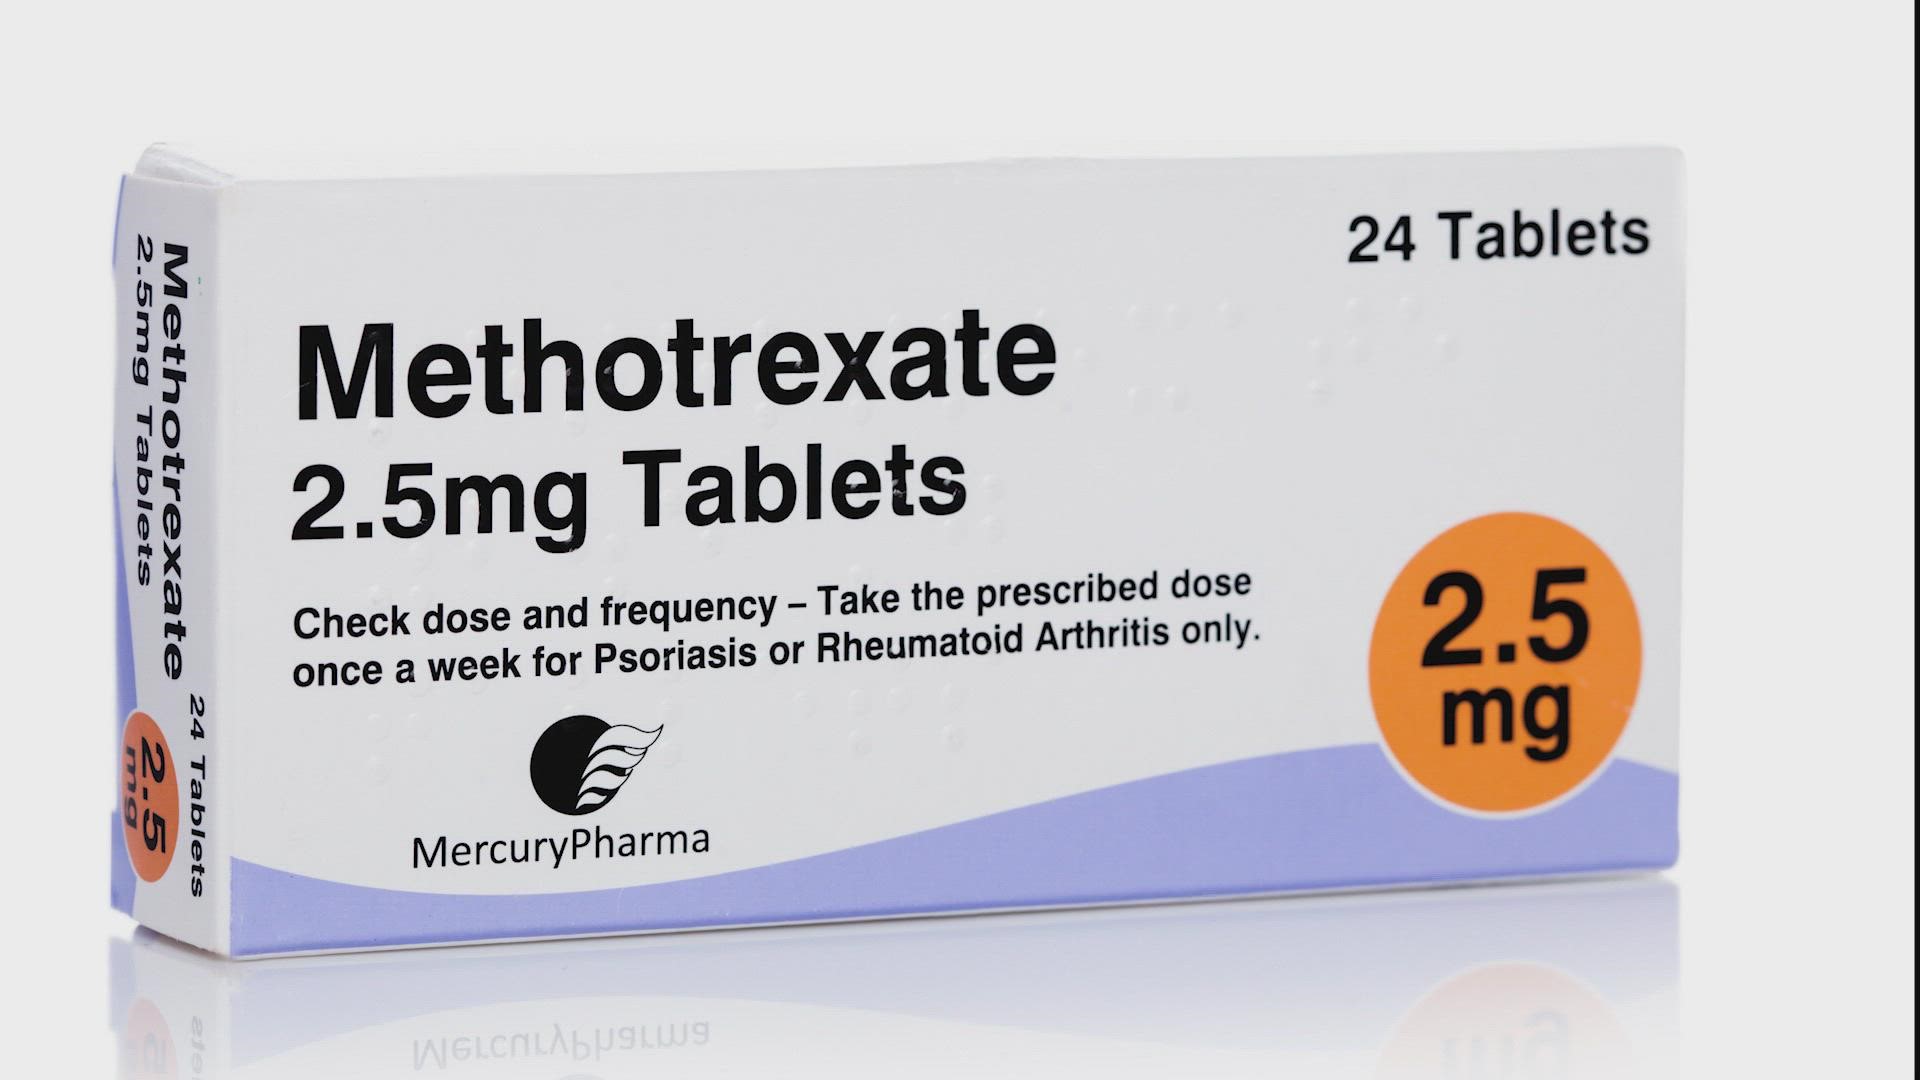 Some women said they’re having trouble getting Methotrexate from pharmacists concerned they could be held responsible for aiding an abortion.